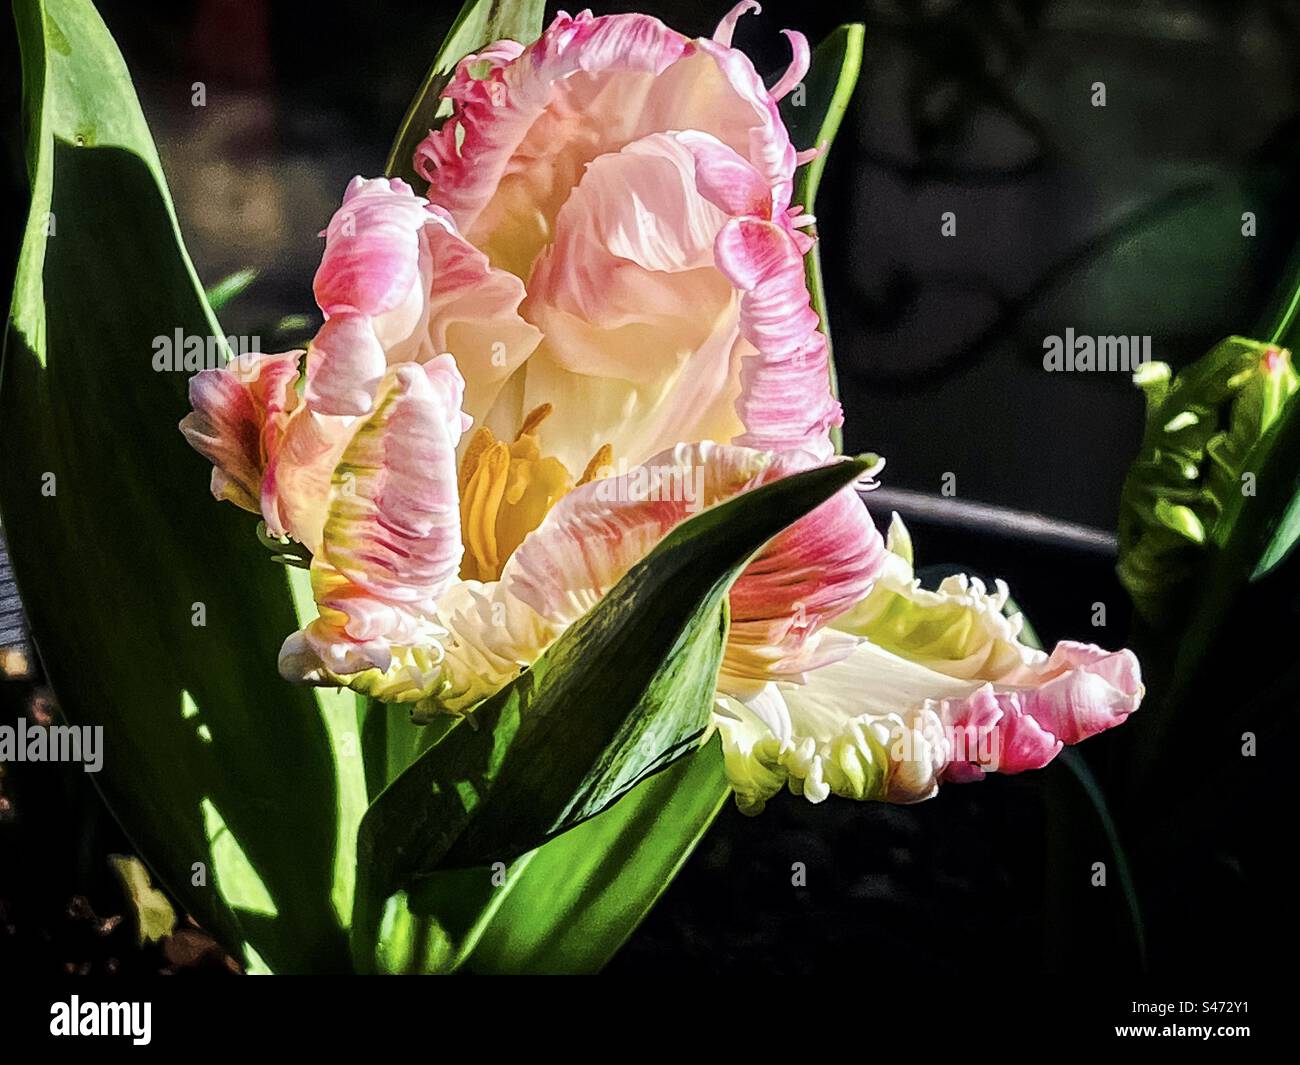 Close-up of pink parrot tulip flowering plant growing in pot outdoors. Focus on foreground. Spring theme. Parrot tulips are a group of cultivars called the Tulipa Parrot Group. Stock Photo